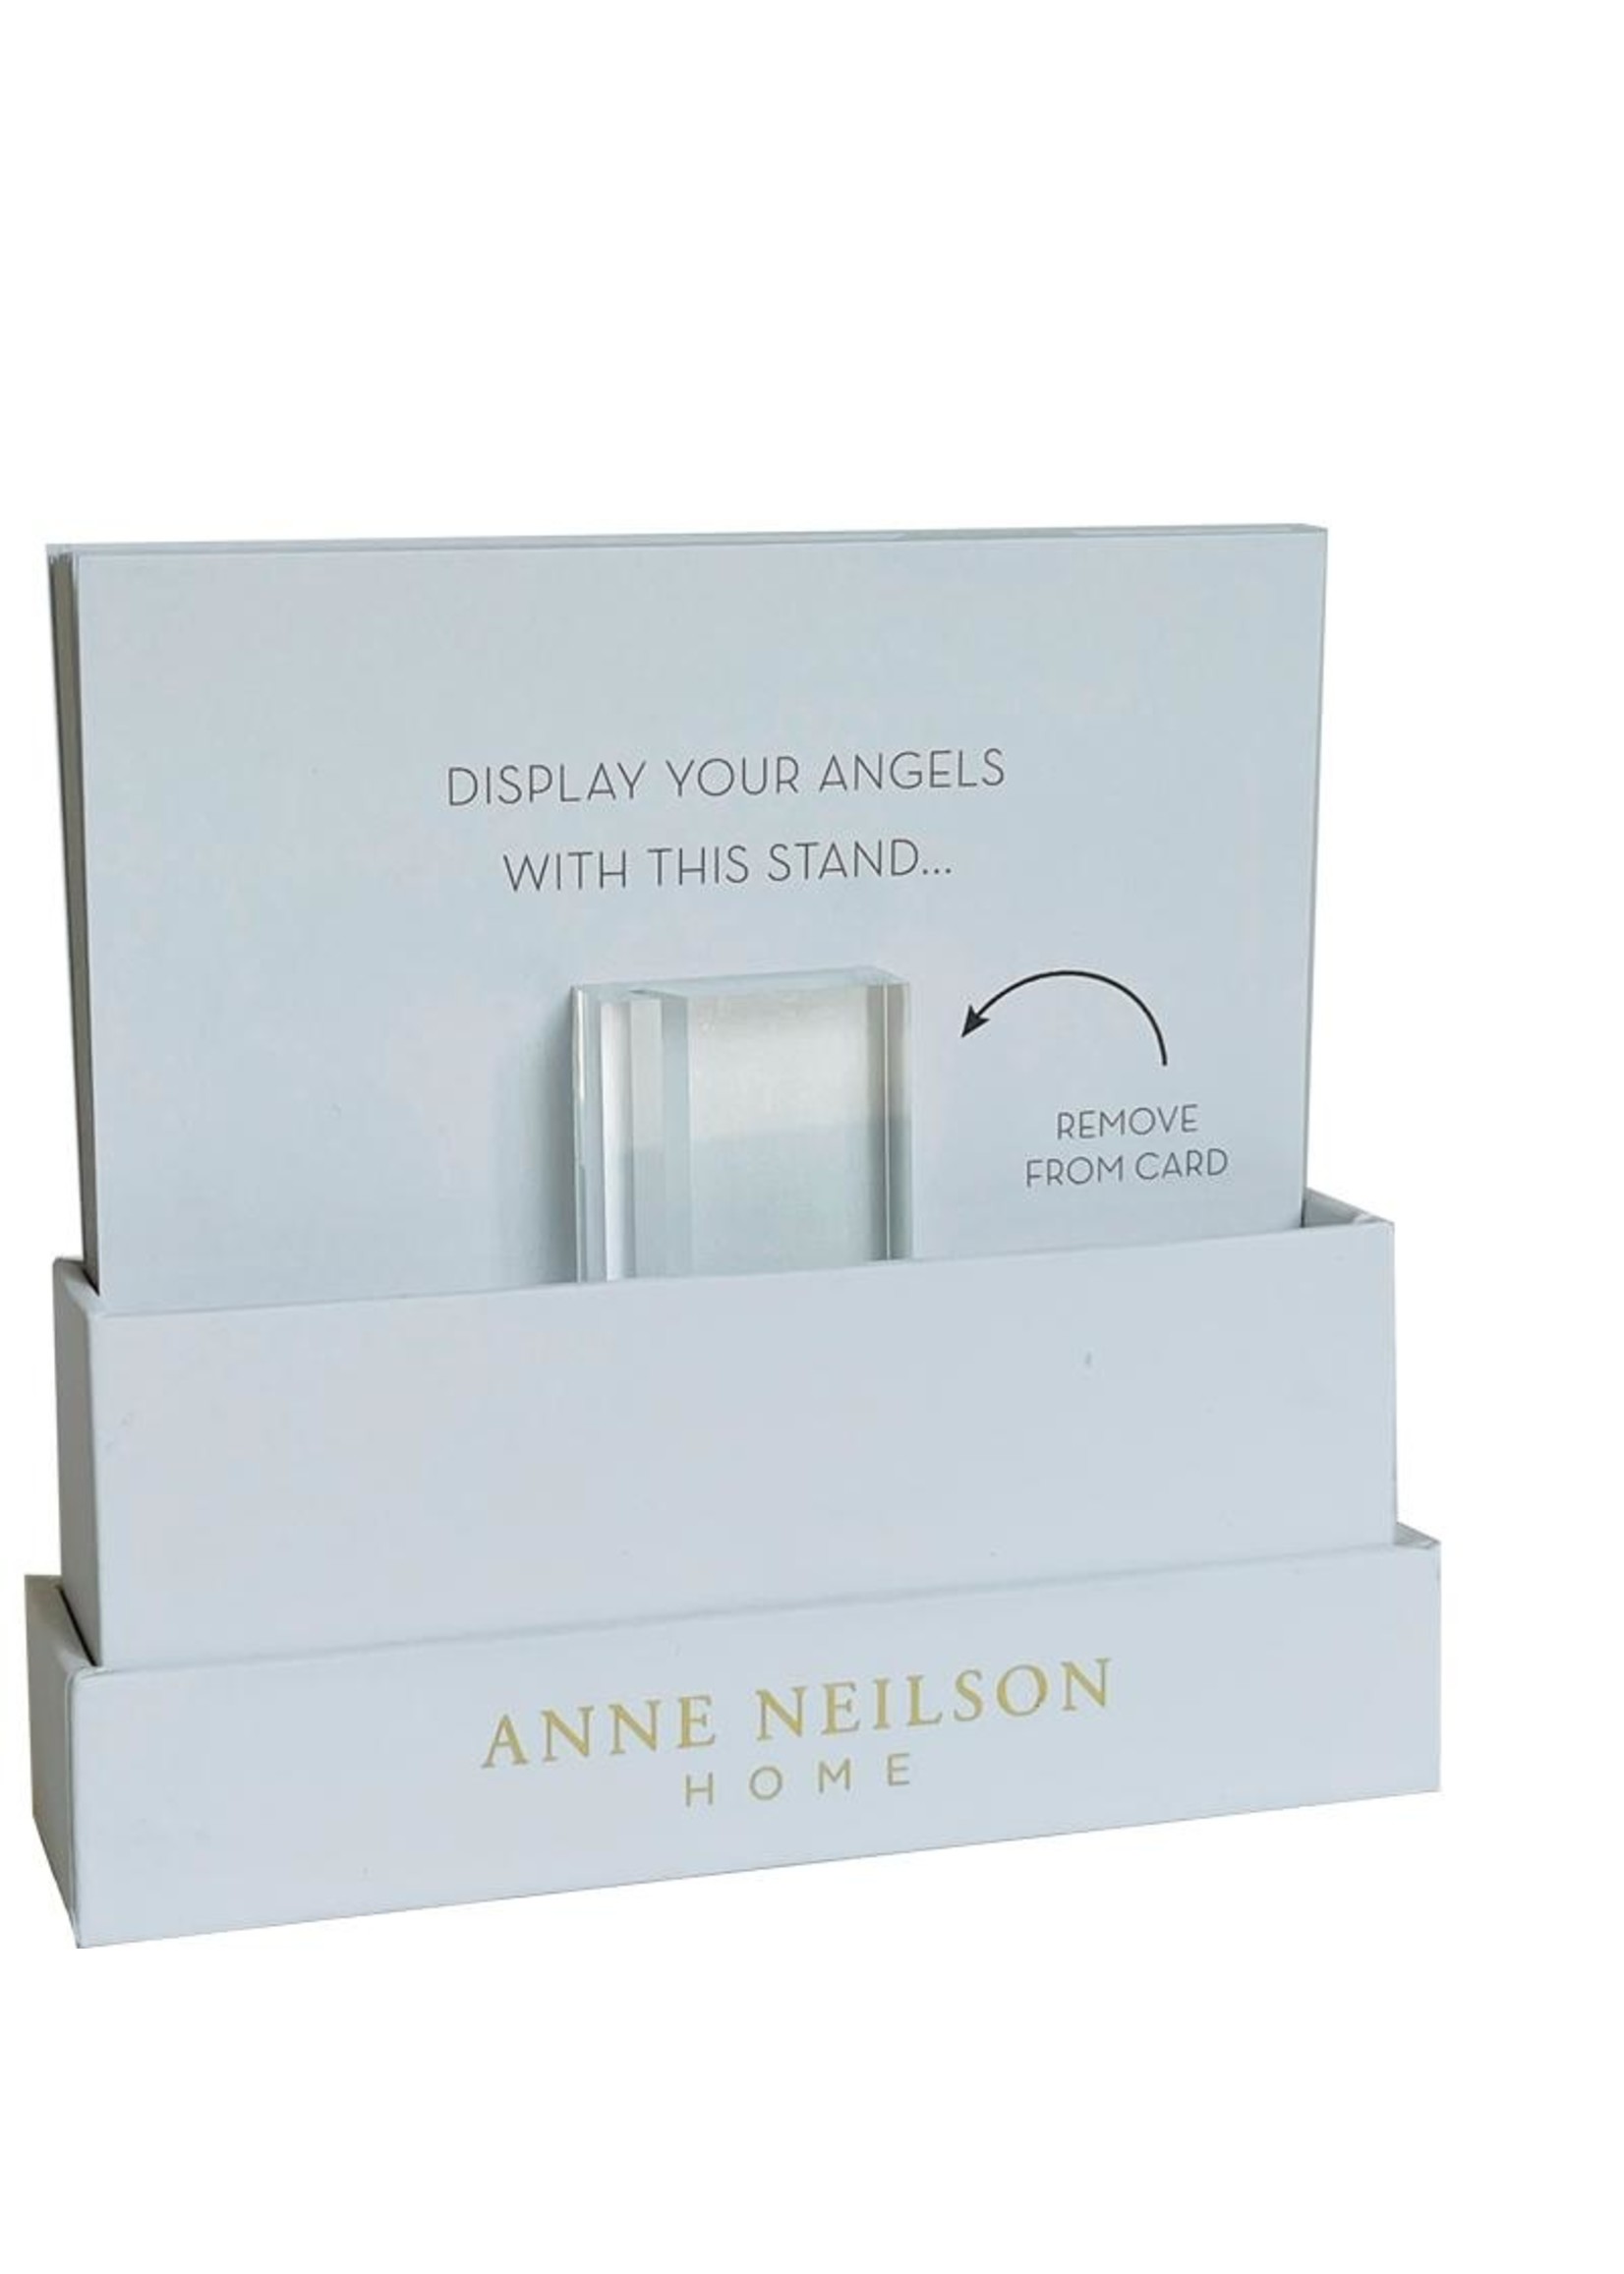 Anne Neilson Home A-Z Scripture Cards